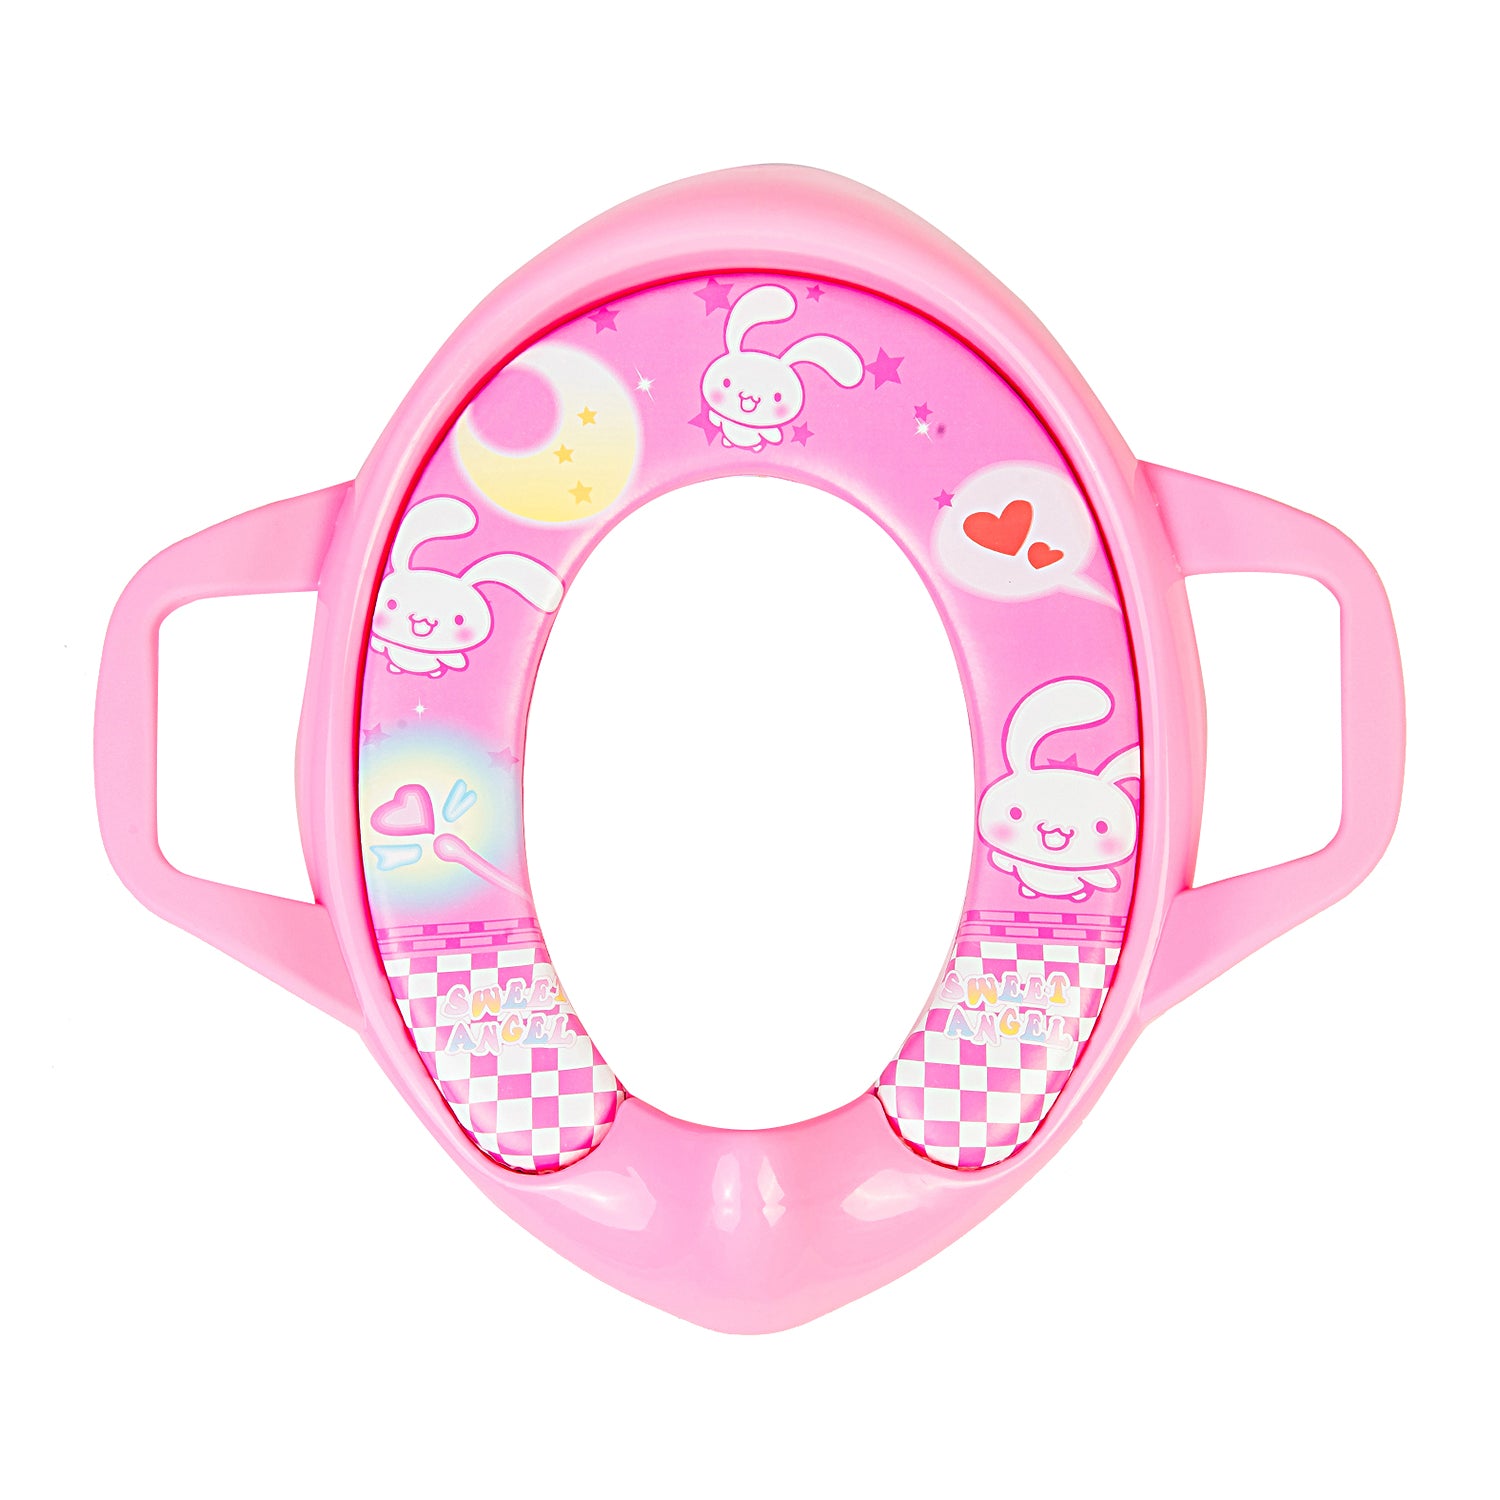 Rabbit Love Pink Potty Seat With Handle